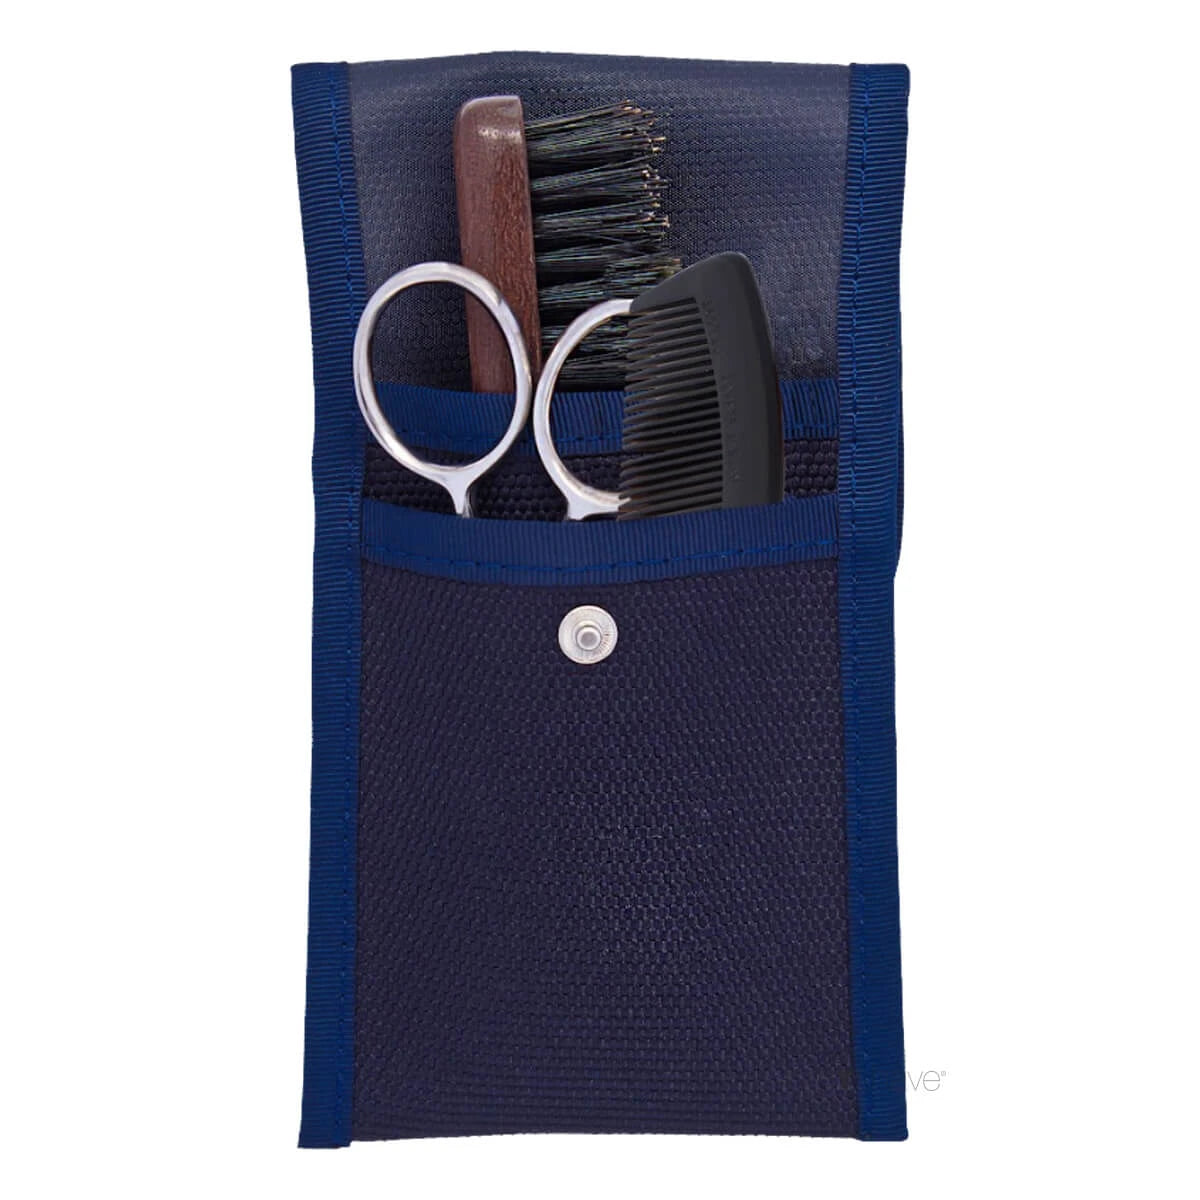 Plisson, Beard Care Kit with Scissors- Comb and Brush